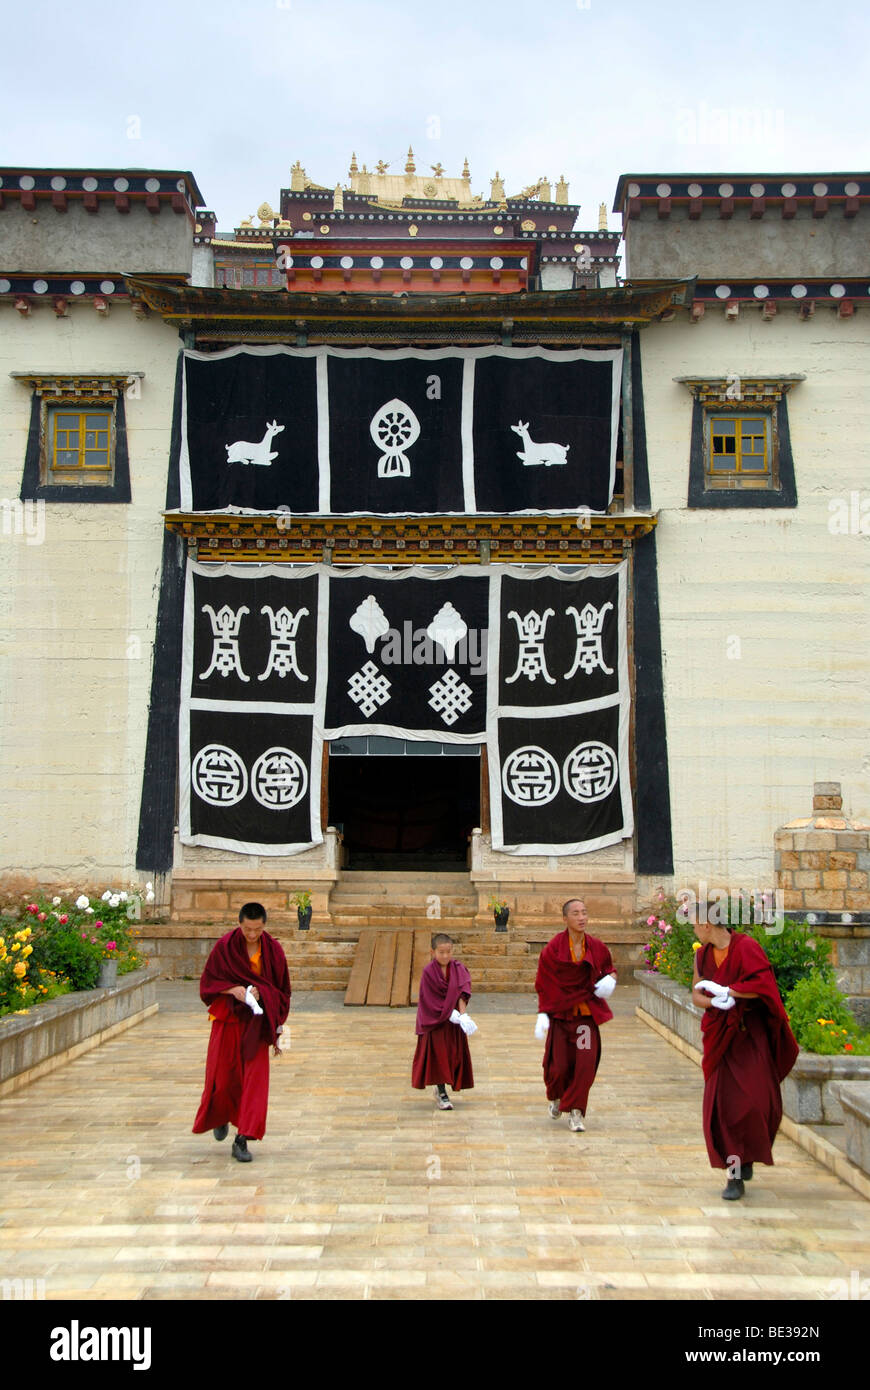 Tibetan Buddhist, monks in red robes, temple with entrance portal, religious symbols, Monastery Ganden Sumtseling Gompa, Zhongd Stock Photo